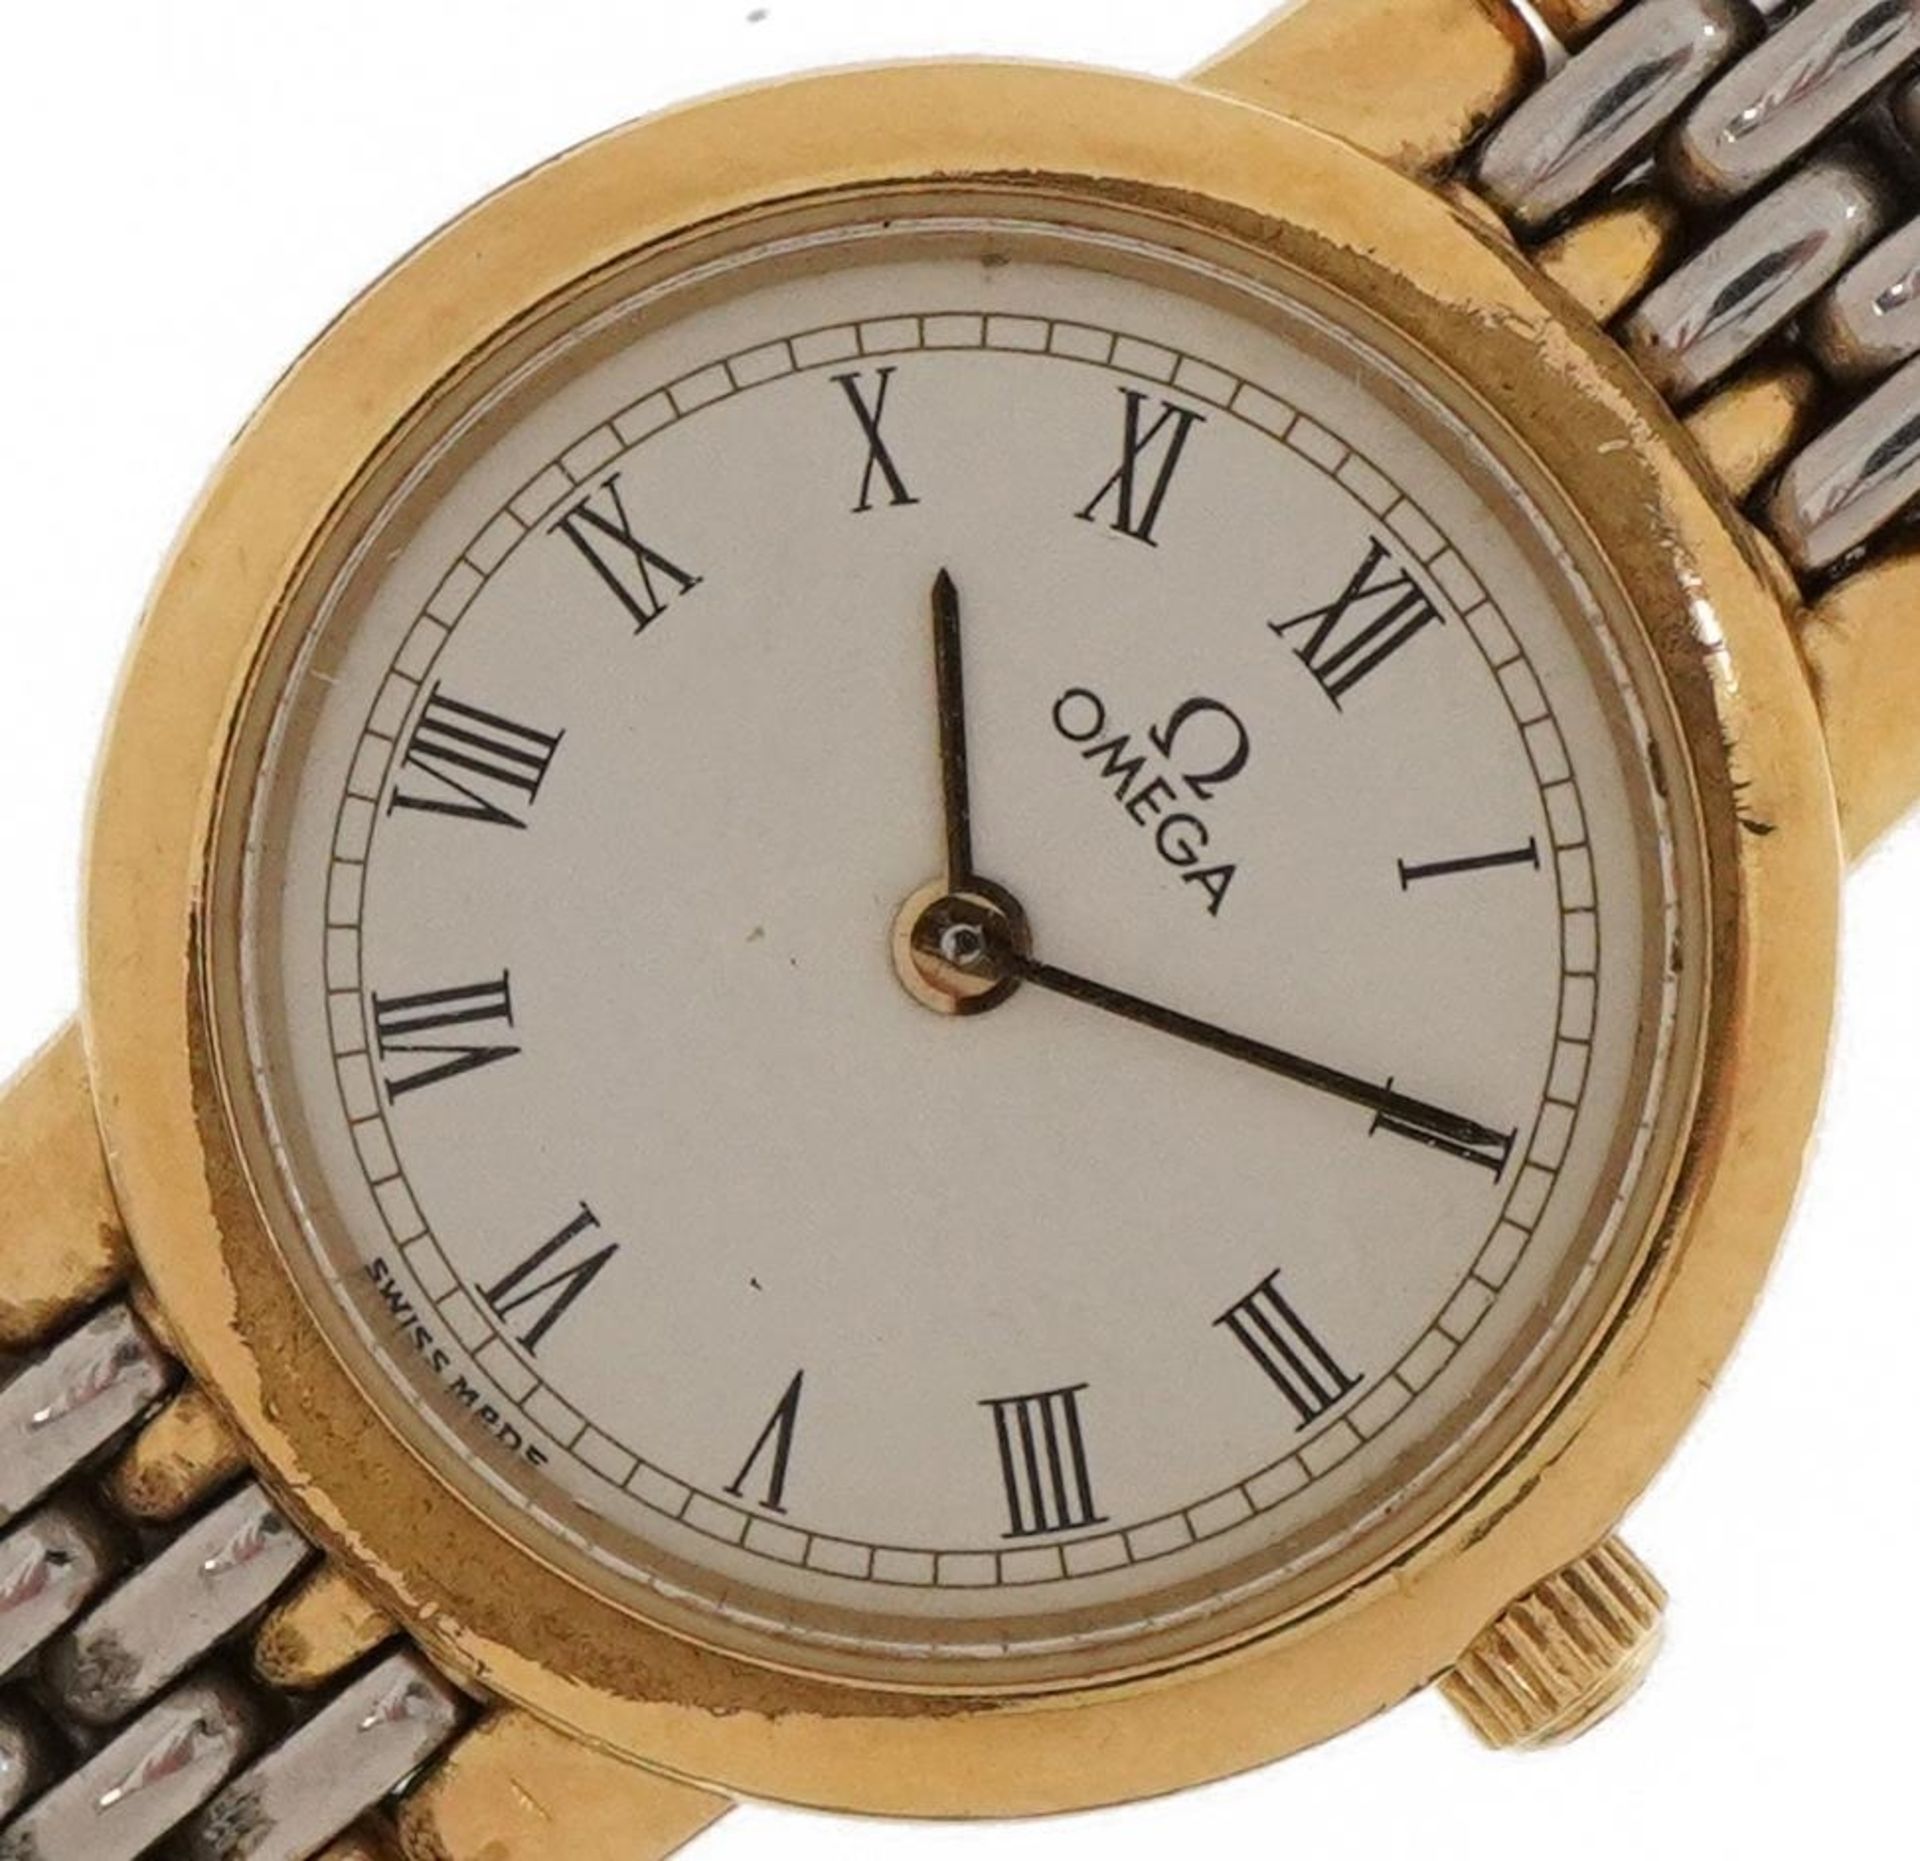 Omega, ladies Omega Deville wristwatch, 21mm in diameter : For further information on this lot